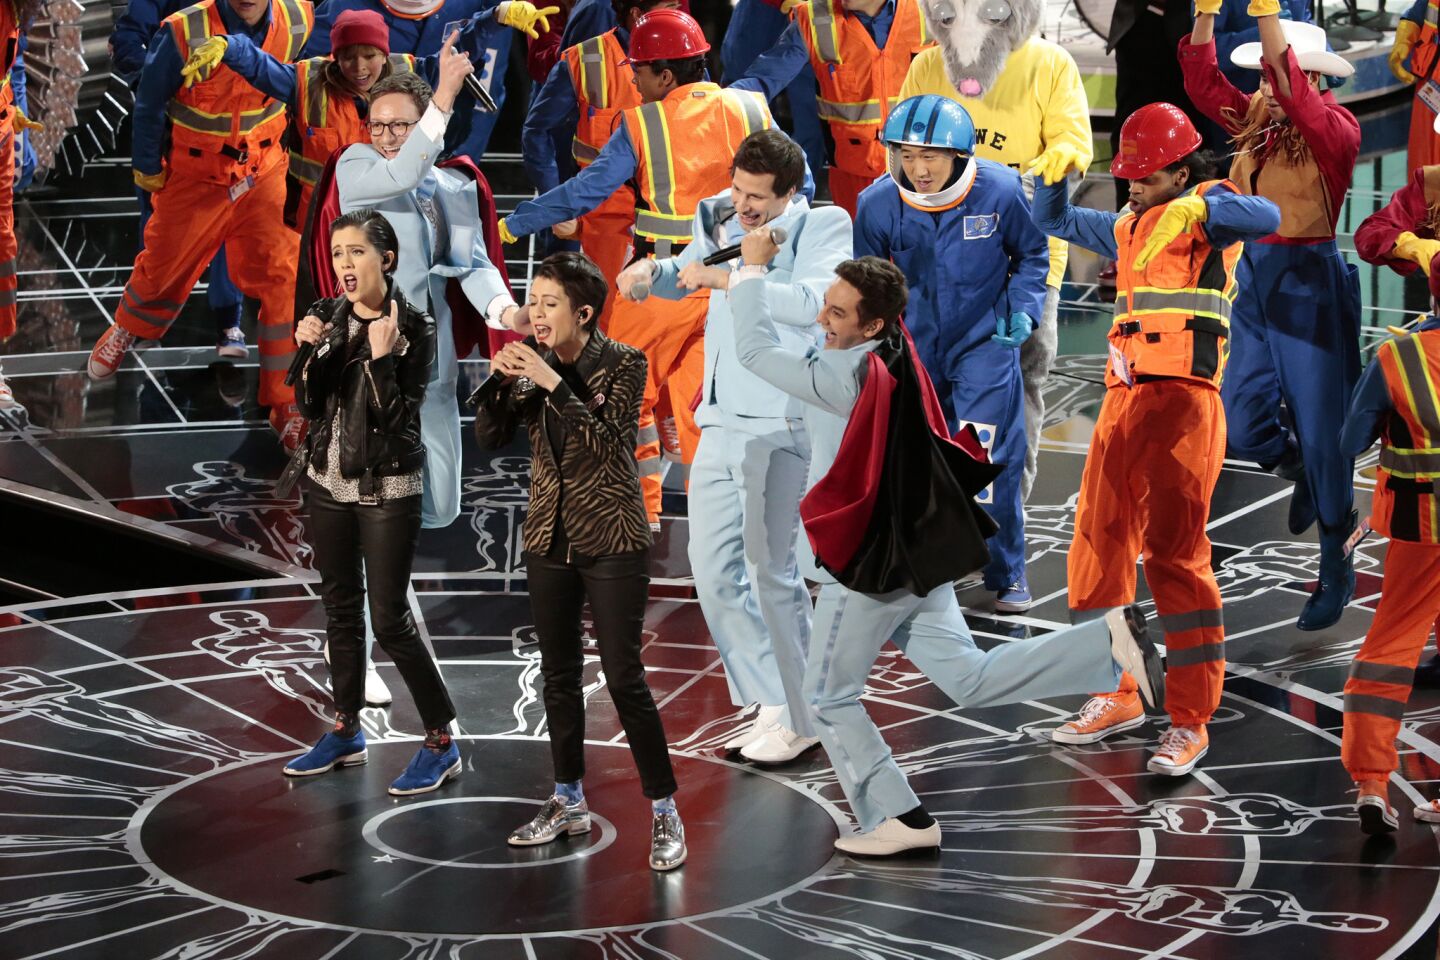 Tegan and Sara perform with the Lonely Island during the 87th Academy Awards on Feb. 22 at the Dolby Theatre in Hollywood.